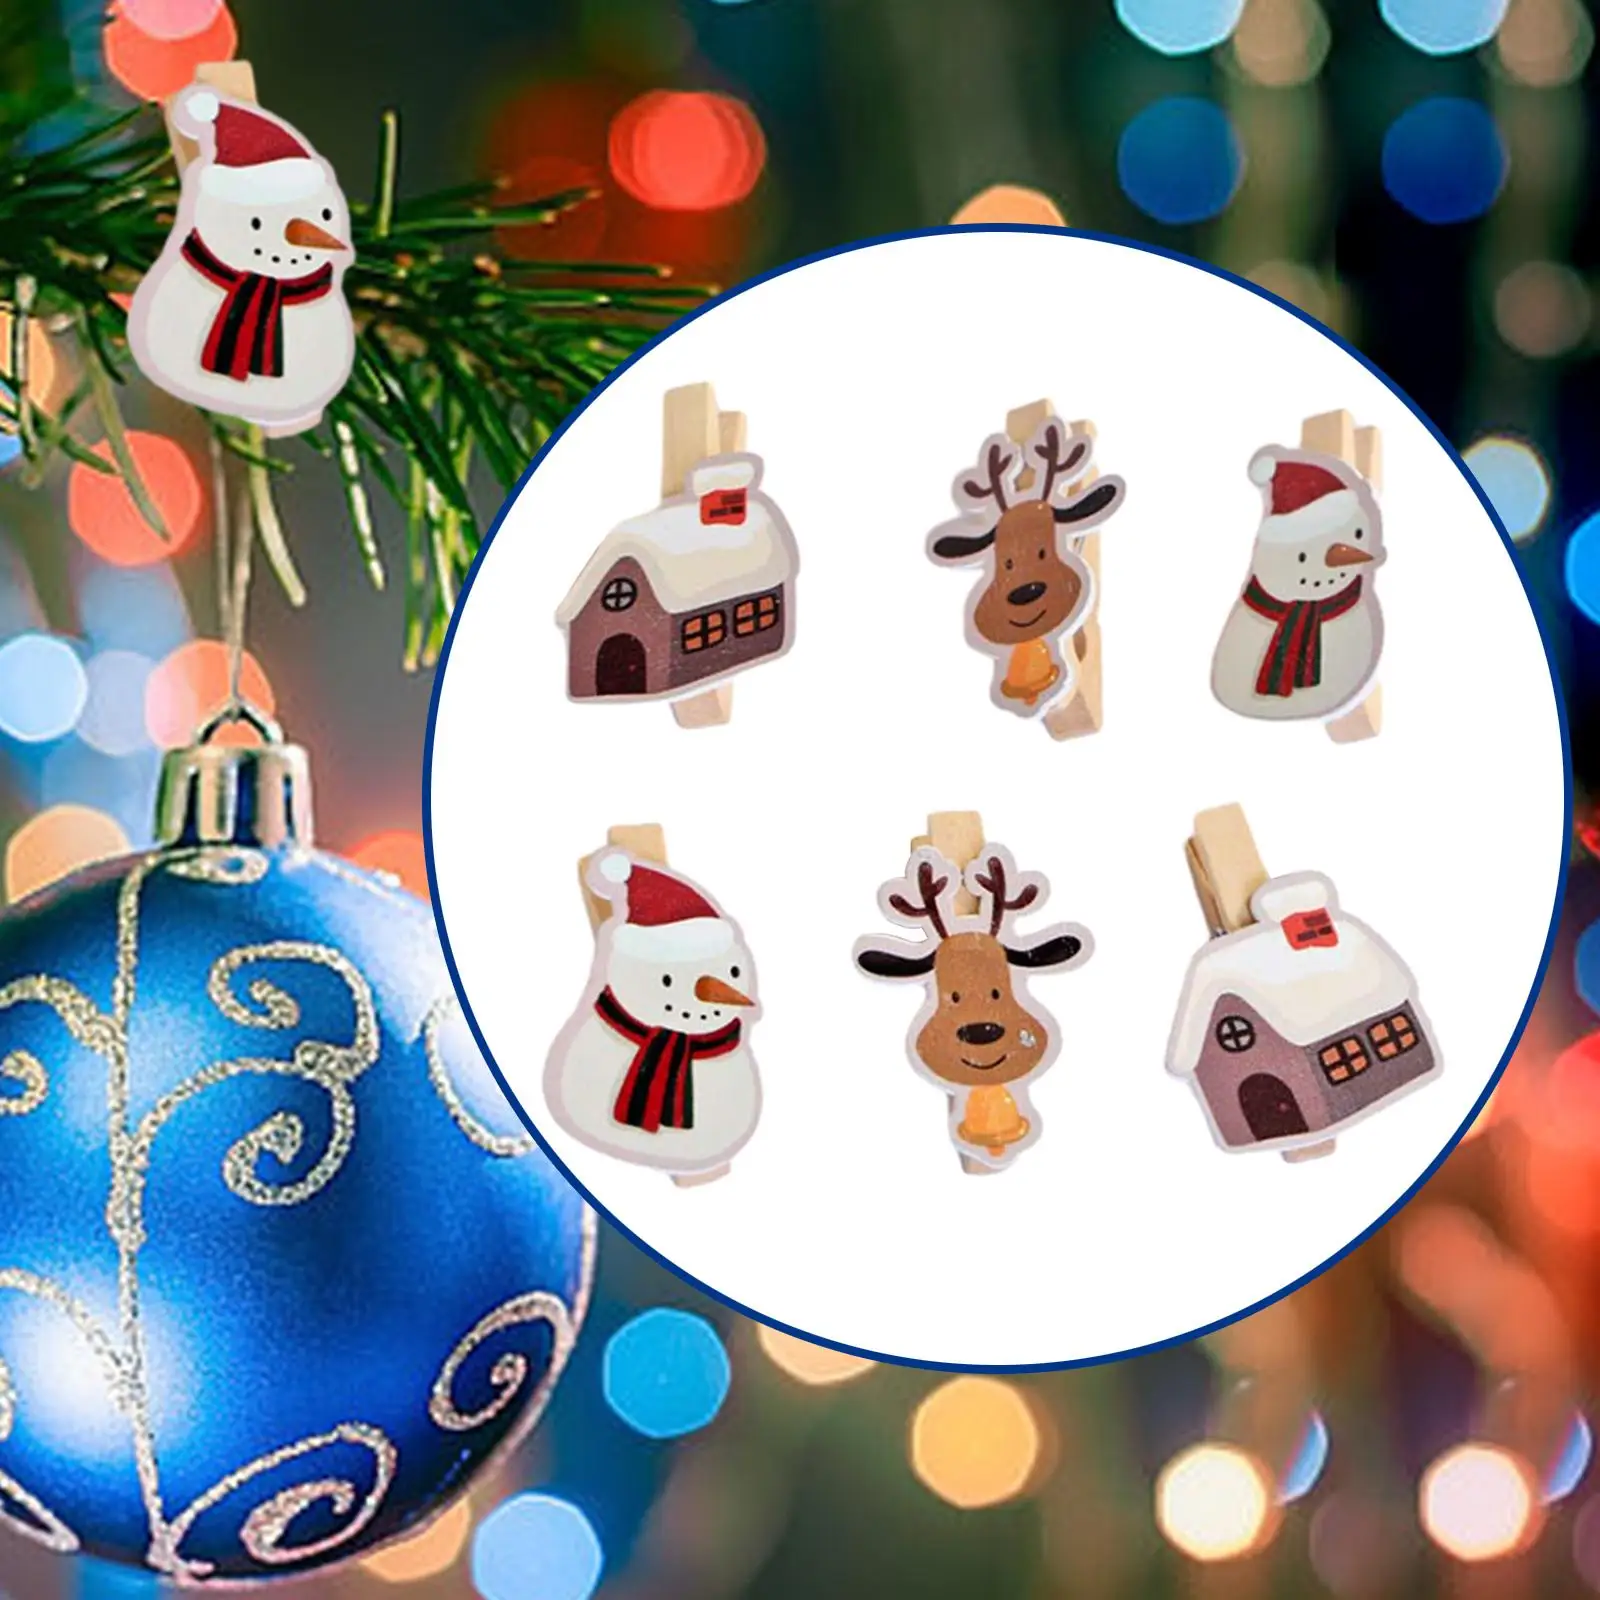 6x Christmas Wooden Clips Christmas Card Pegs Lovely Christmas Ornaments for Paper Crafts Cards Photo Holiday Party Supplies